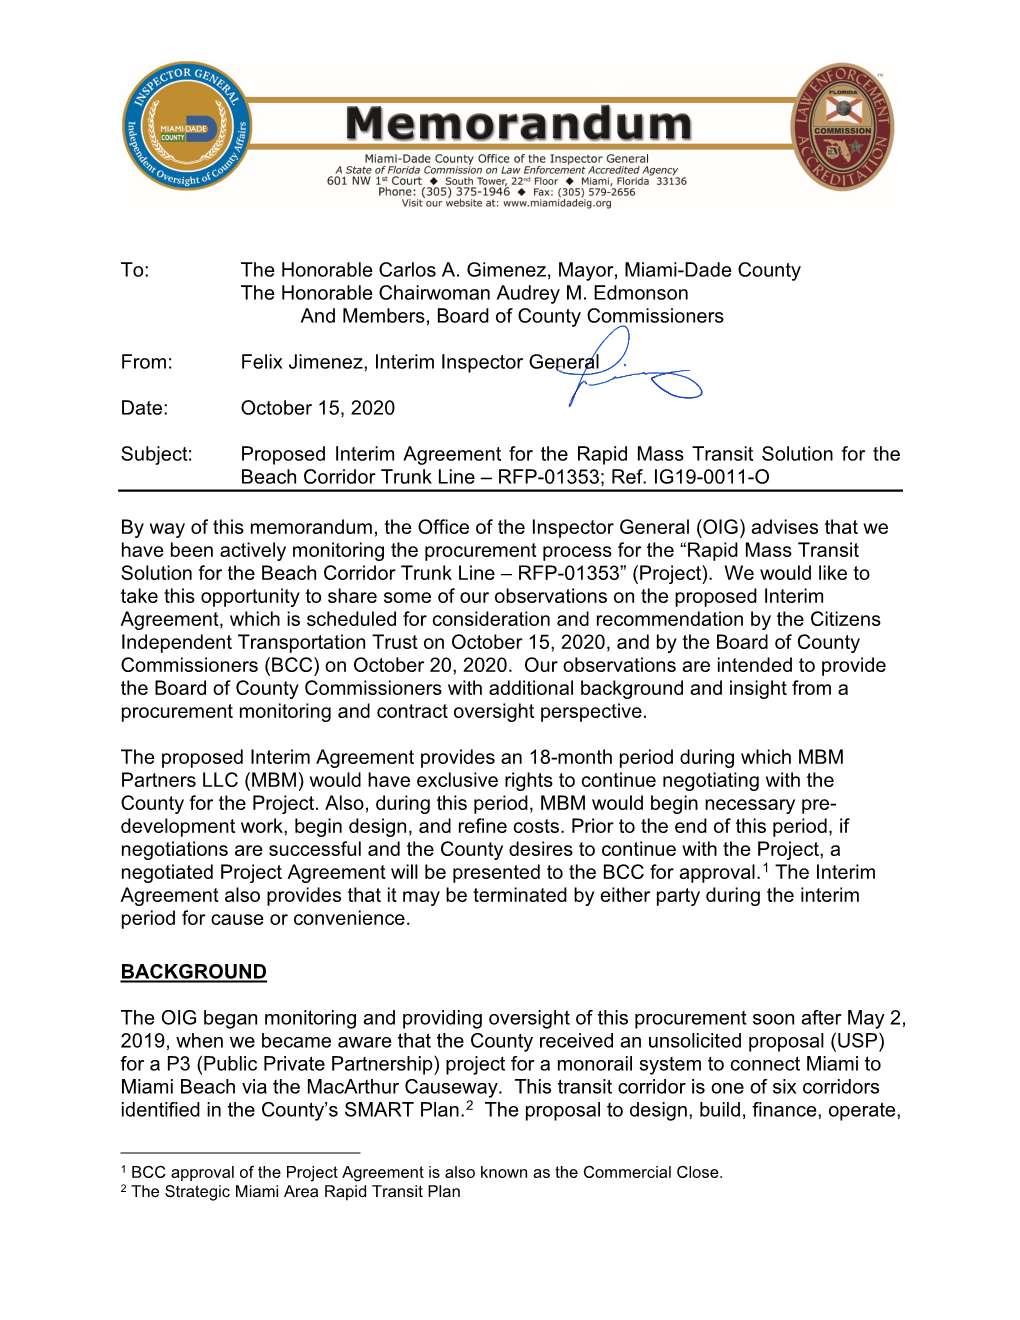 Proposed Interim Agreement for the Rapid Mass Transit Solution for the Beach Corridor Trunk Line – RFP-01353; Ref